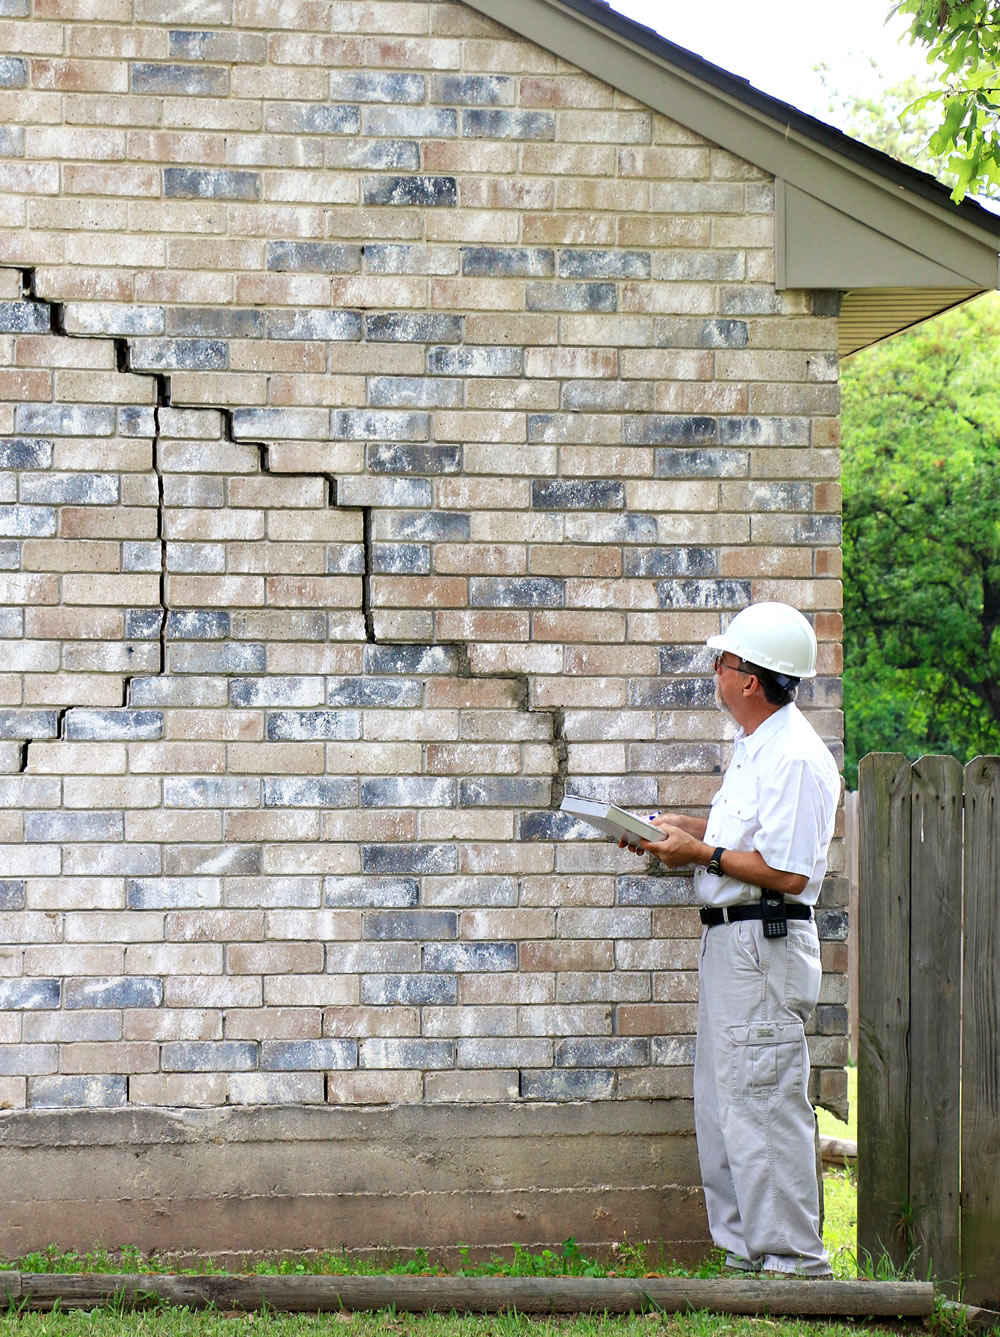 Inspector standing next to brick home with diagonal crack in brick